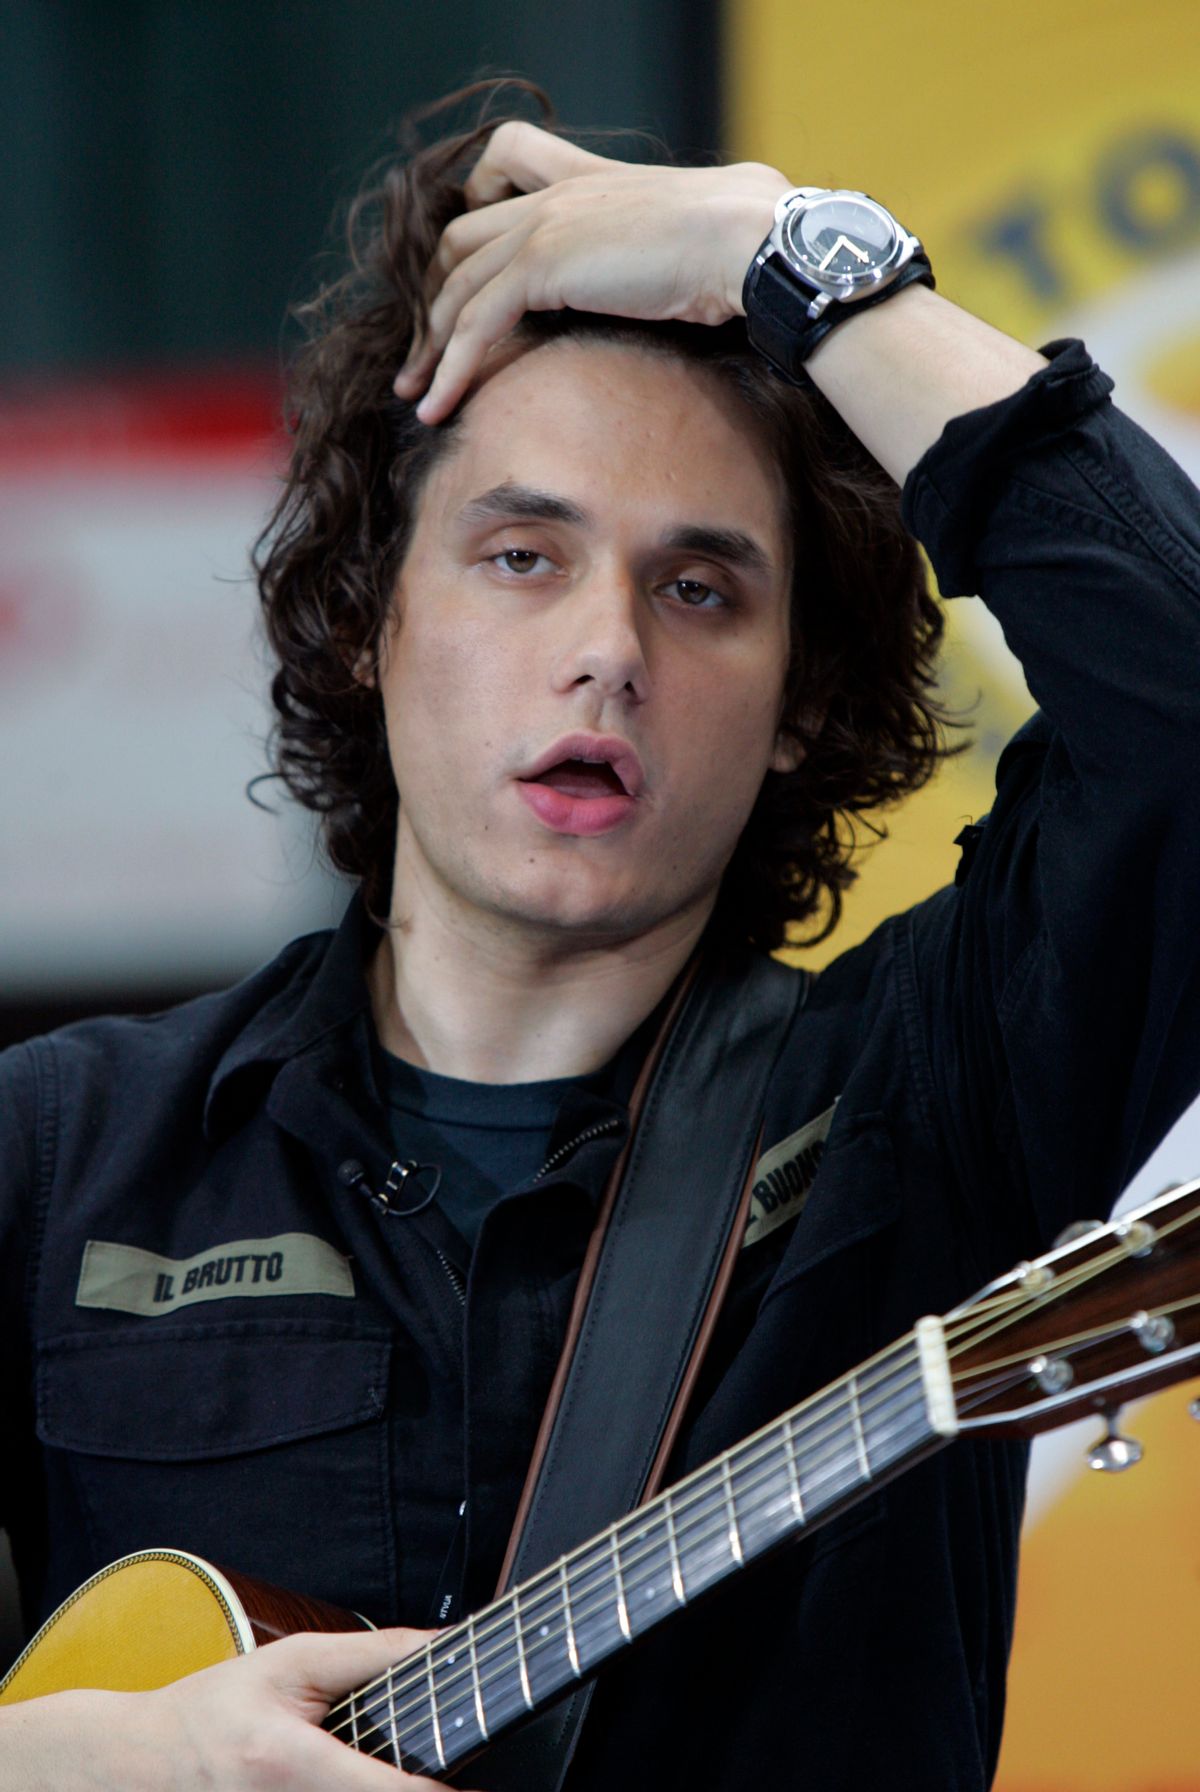 Singer John Mayer rearranges his hair during his appearance on the NBC "Today" television program in New York's Rockefeller Center, Friday Aug. 25, 2006. Mayer began a concert tour with Sheryl Crow in Pittsburgh Thursday Aug. 24, 2006. (AP Photo/Richard Drew)   (Associated Press)